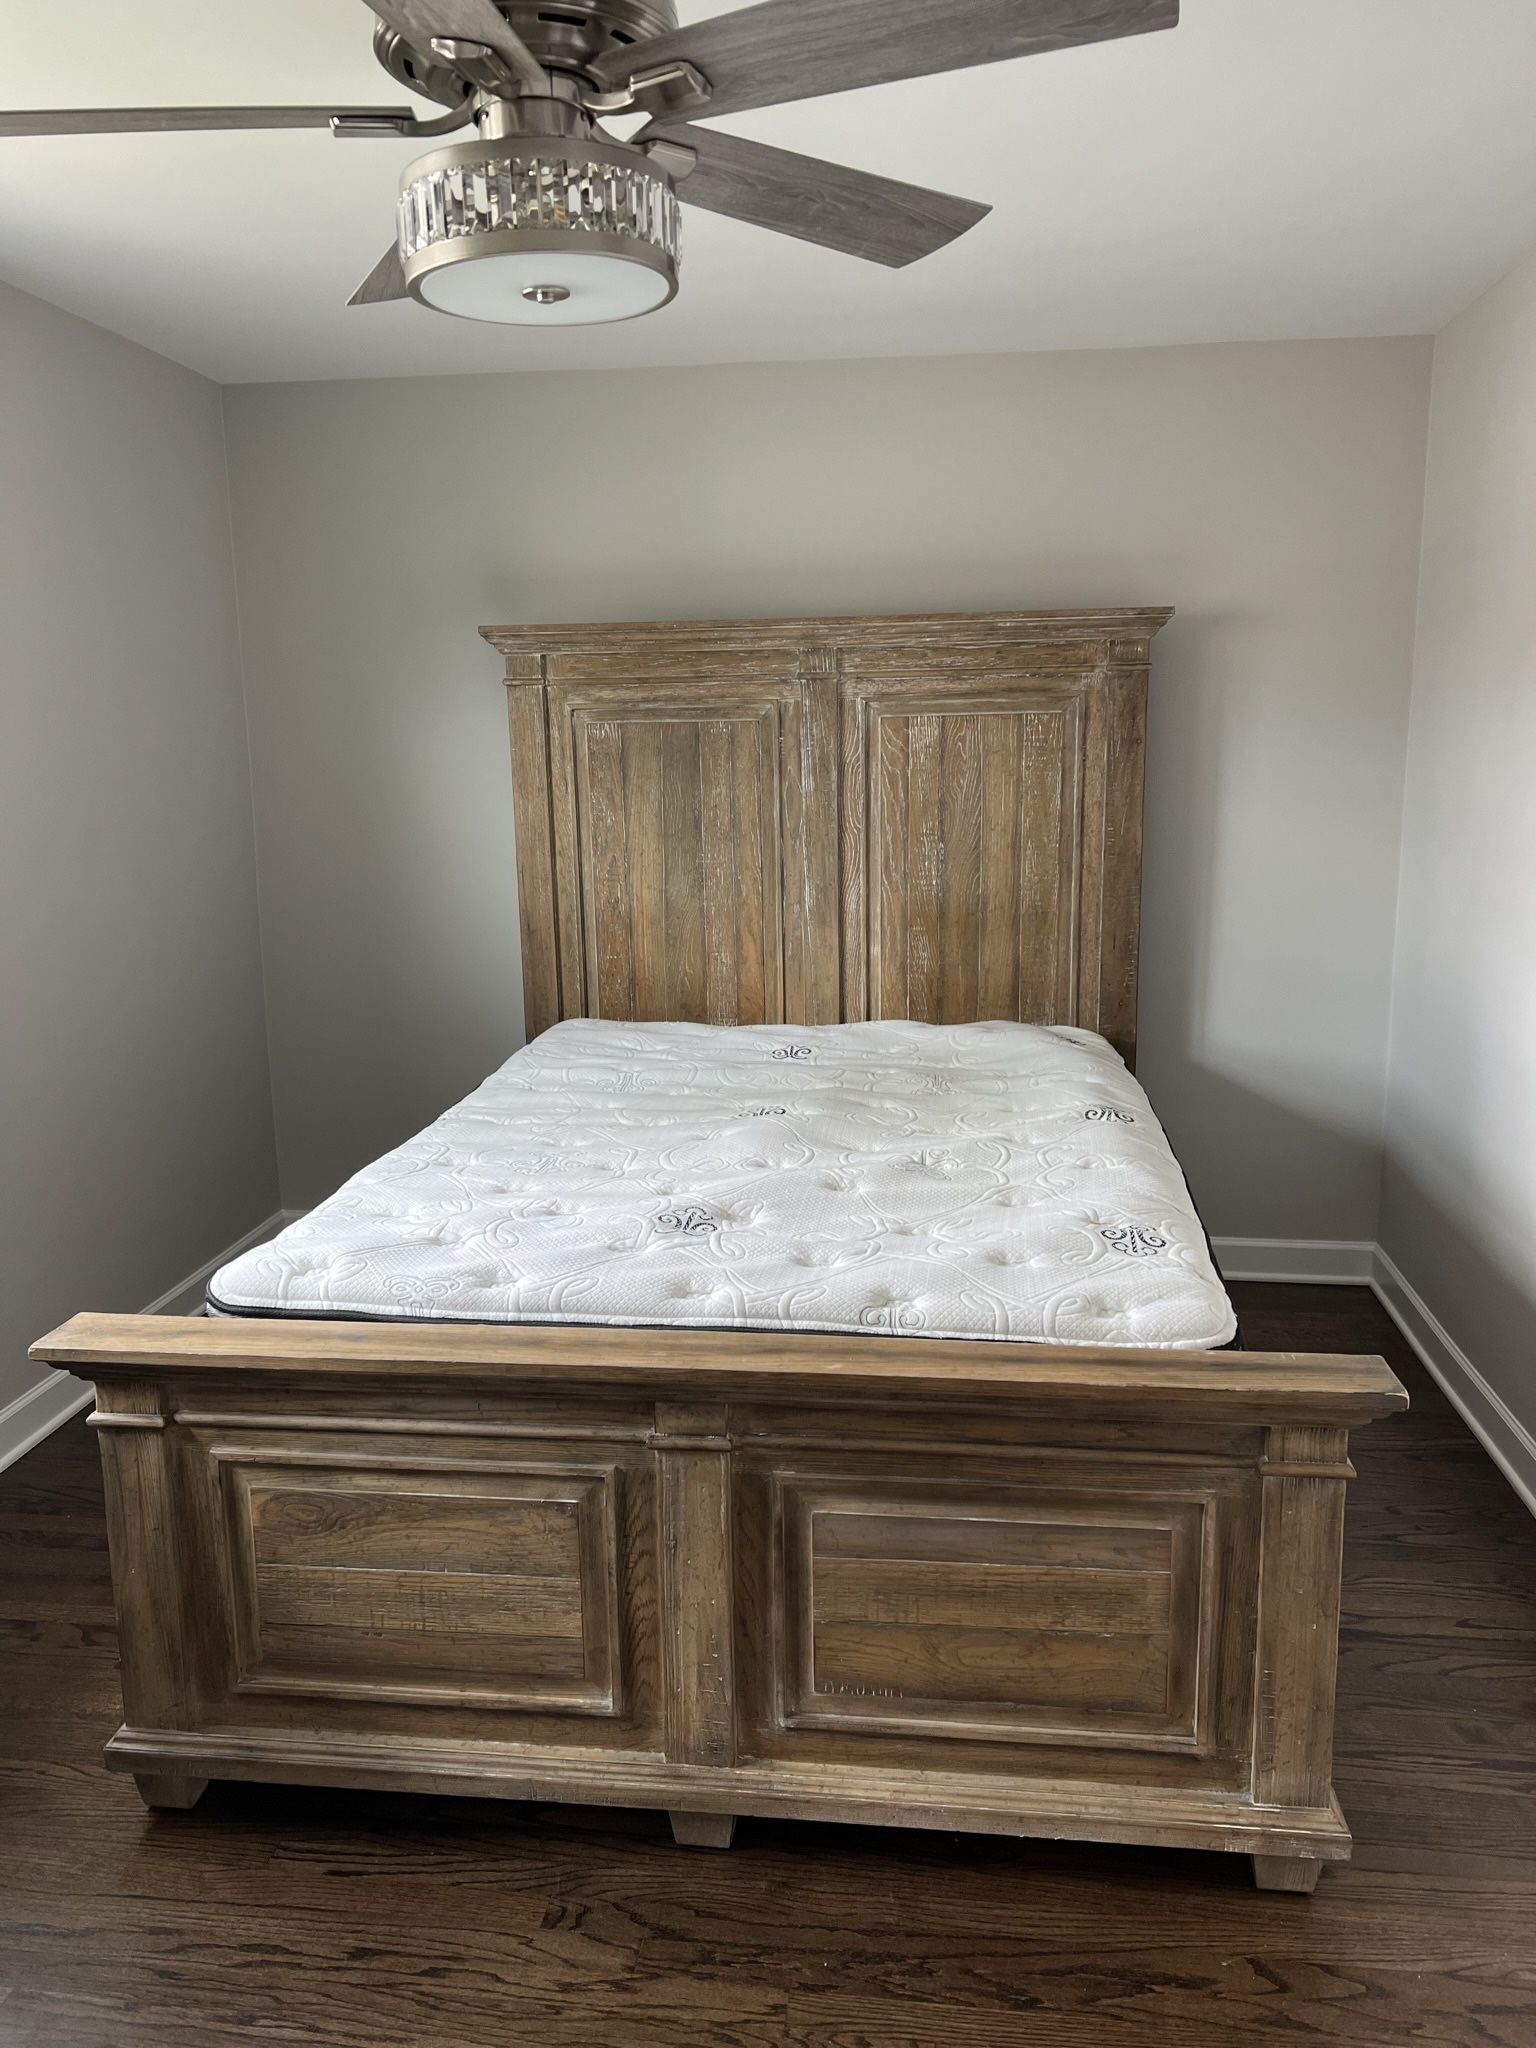 Queen Bed frame And 8 Drawer Dresser